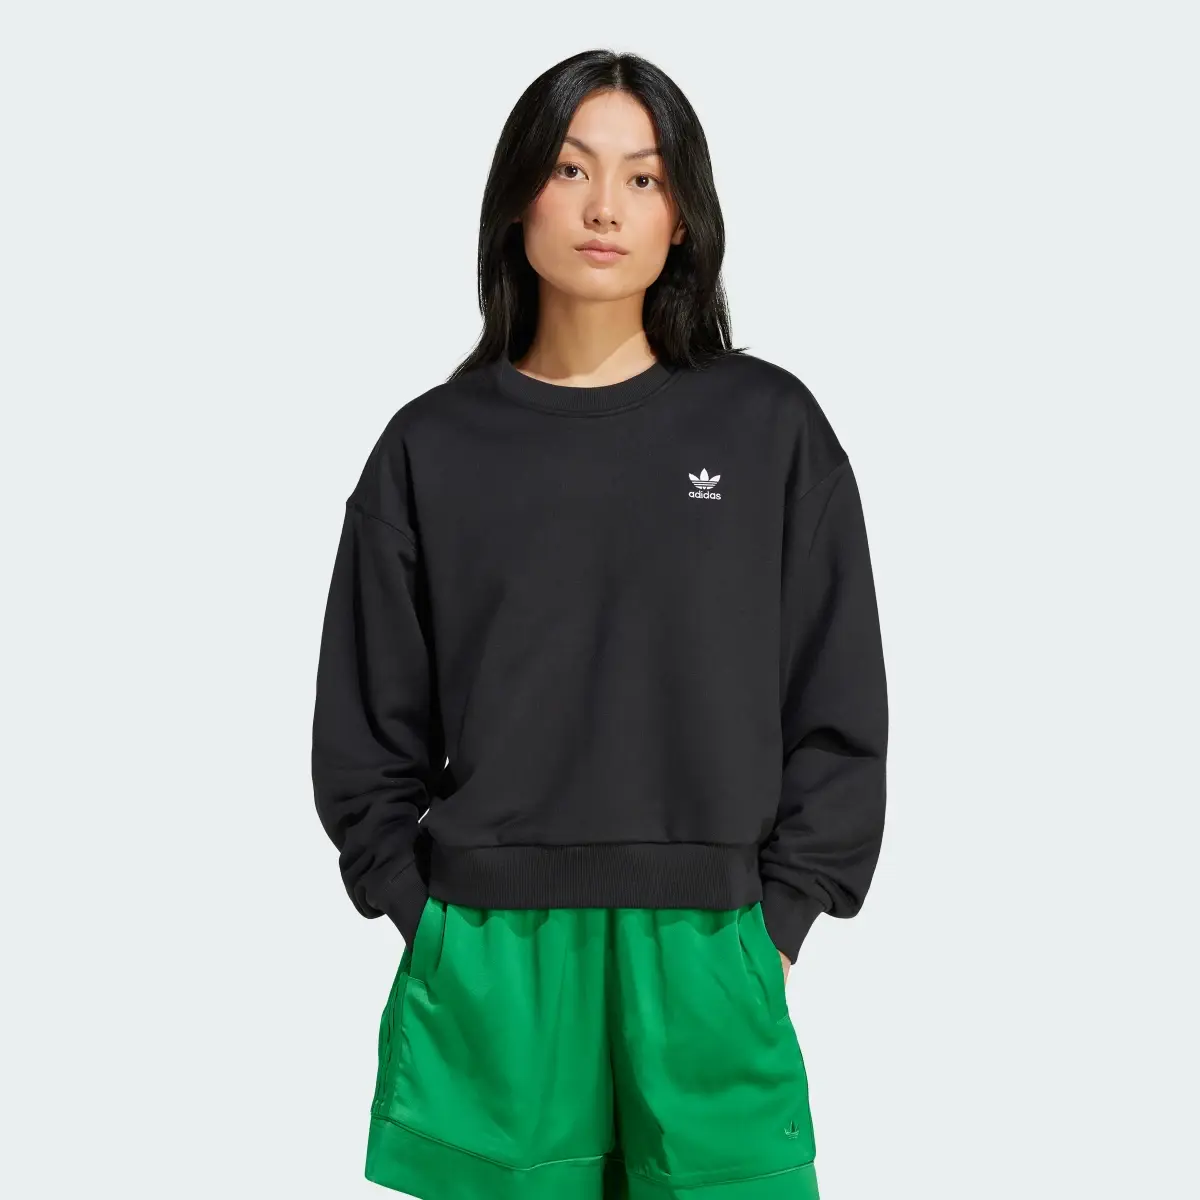 Adidas Trefoil Cropped Sweater. 2